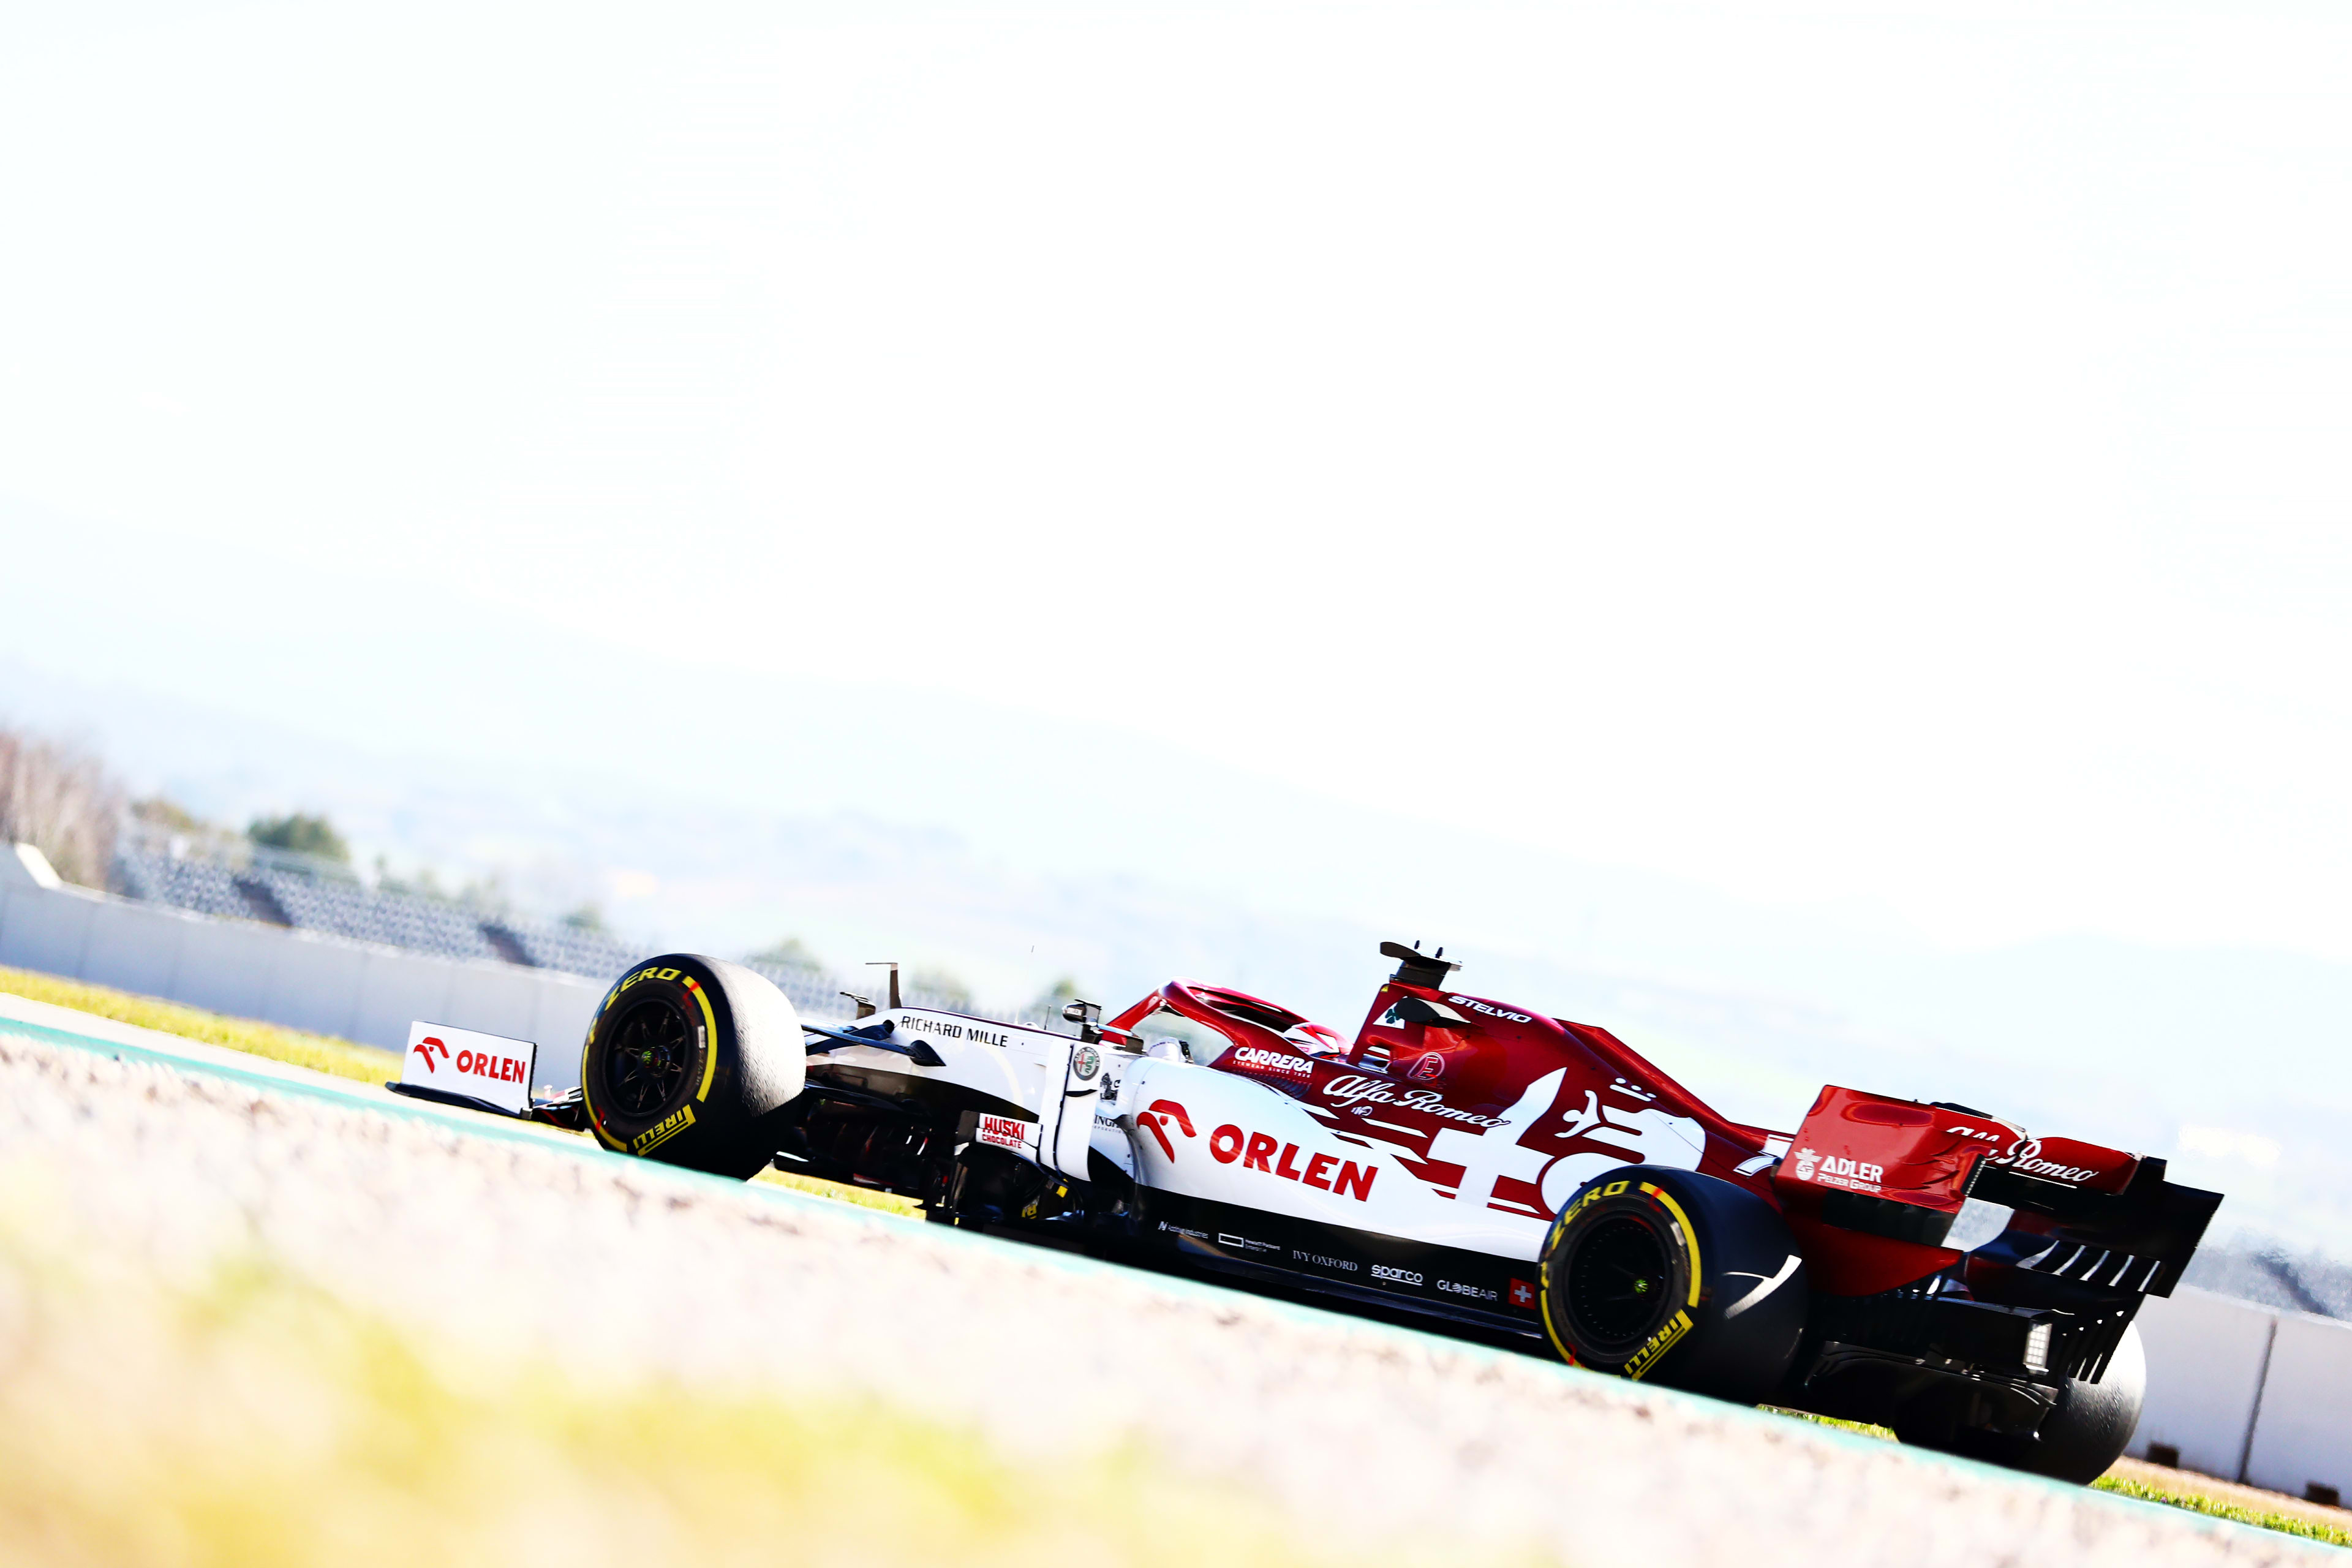 ALFA ROMEO: Everything you need to know before the 2020 F1 season